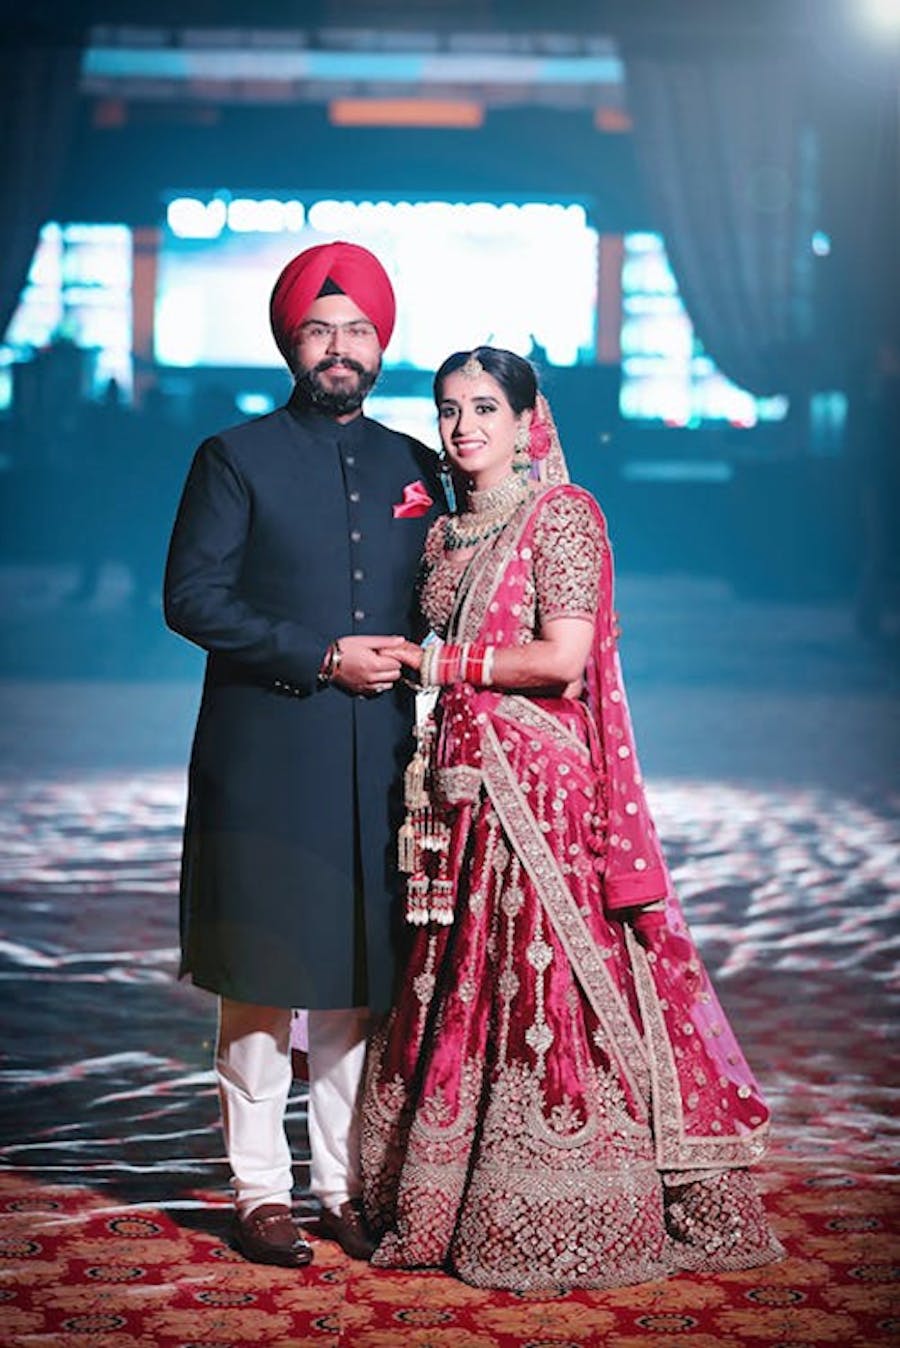 1. Traditional Wear in Couples Matching Outfits: